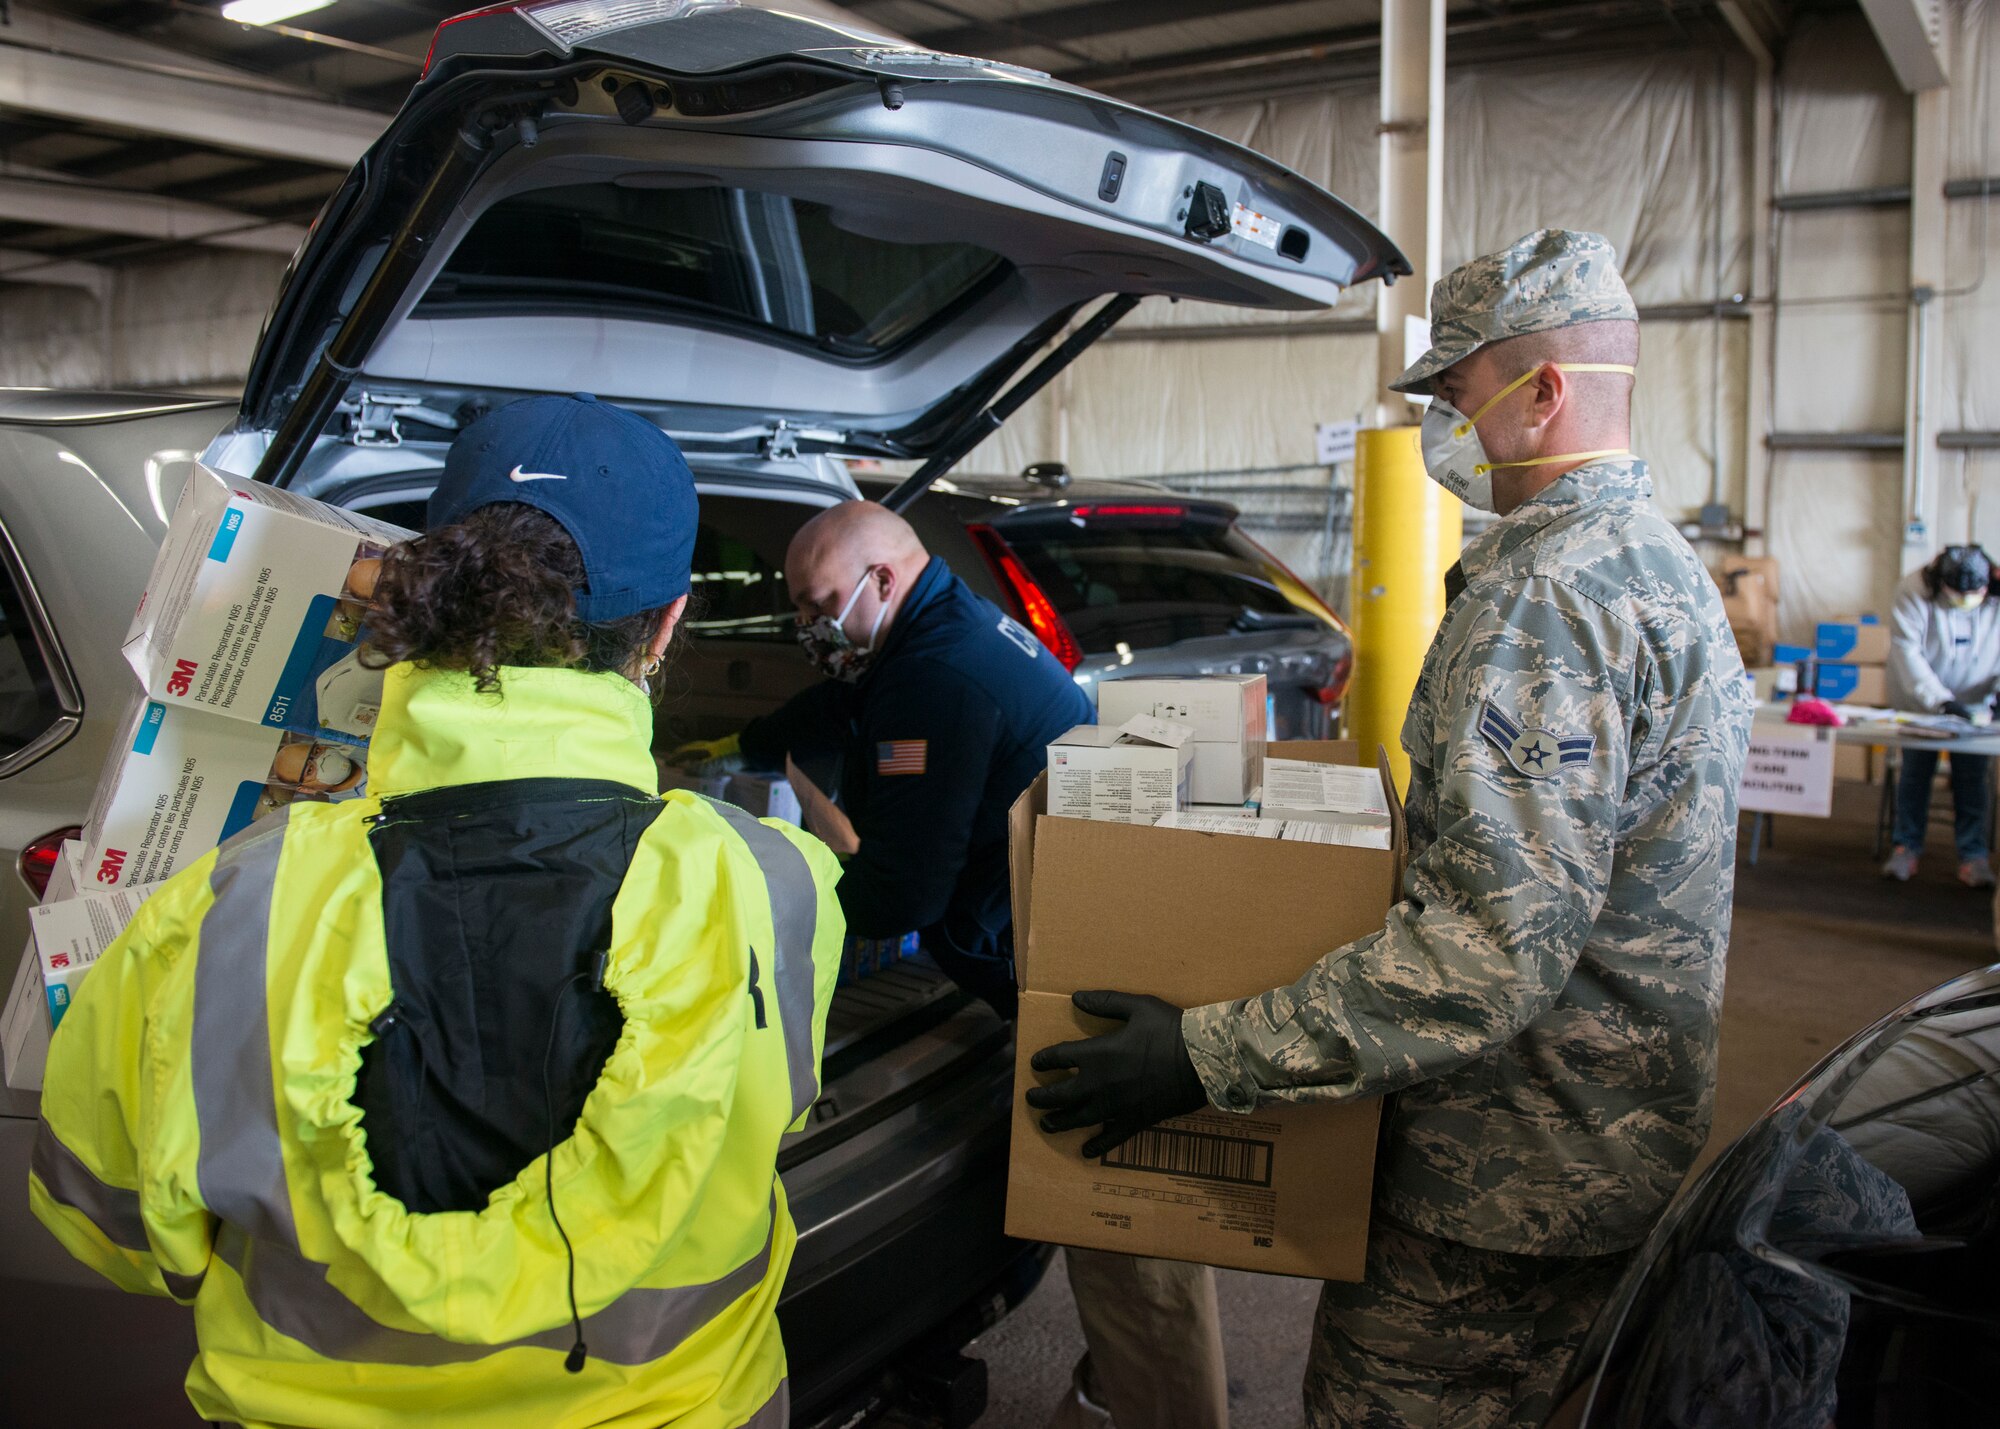 A Connecticut National Guard Airman helps load boxes of PPE into a vehicle at a distribution site in West Hartford, Connecticut, April 22, 2020. The Connecticut National Guard is supporting the Connecticut Department of Public Health in distributing items including masks, gloves, and face shields to assisted living facilities, residential care homes, long-term care facilities, and first responders. (U.S. Air National Guard photo by Staff Sgt. Steven Tucker)